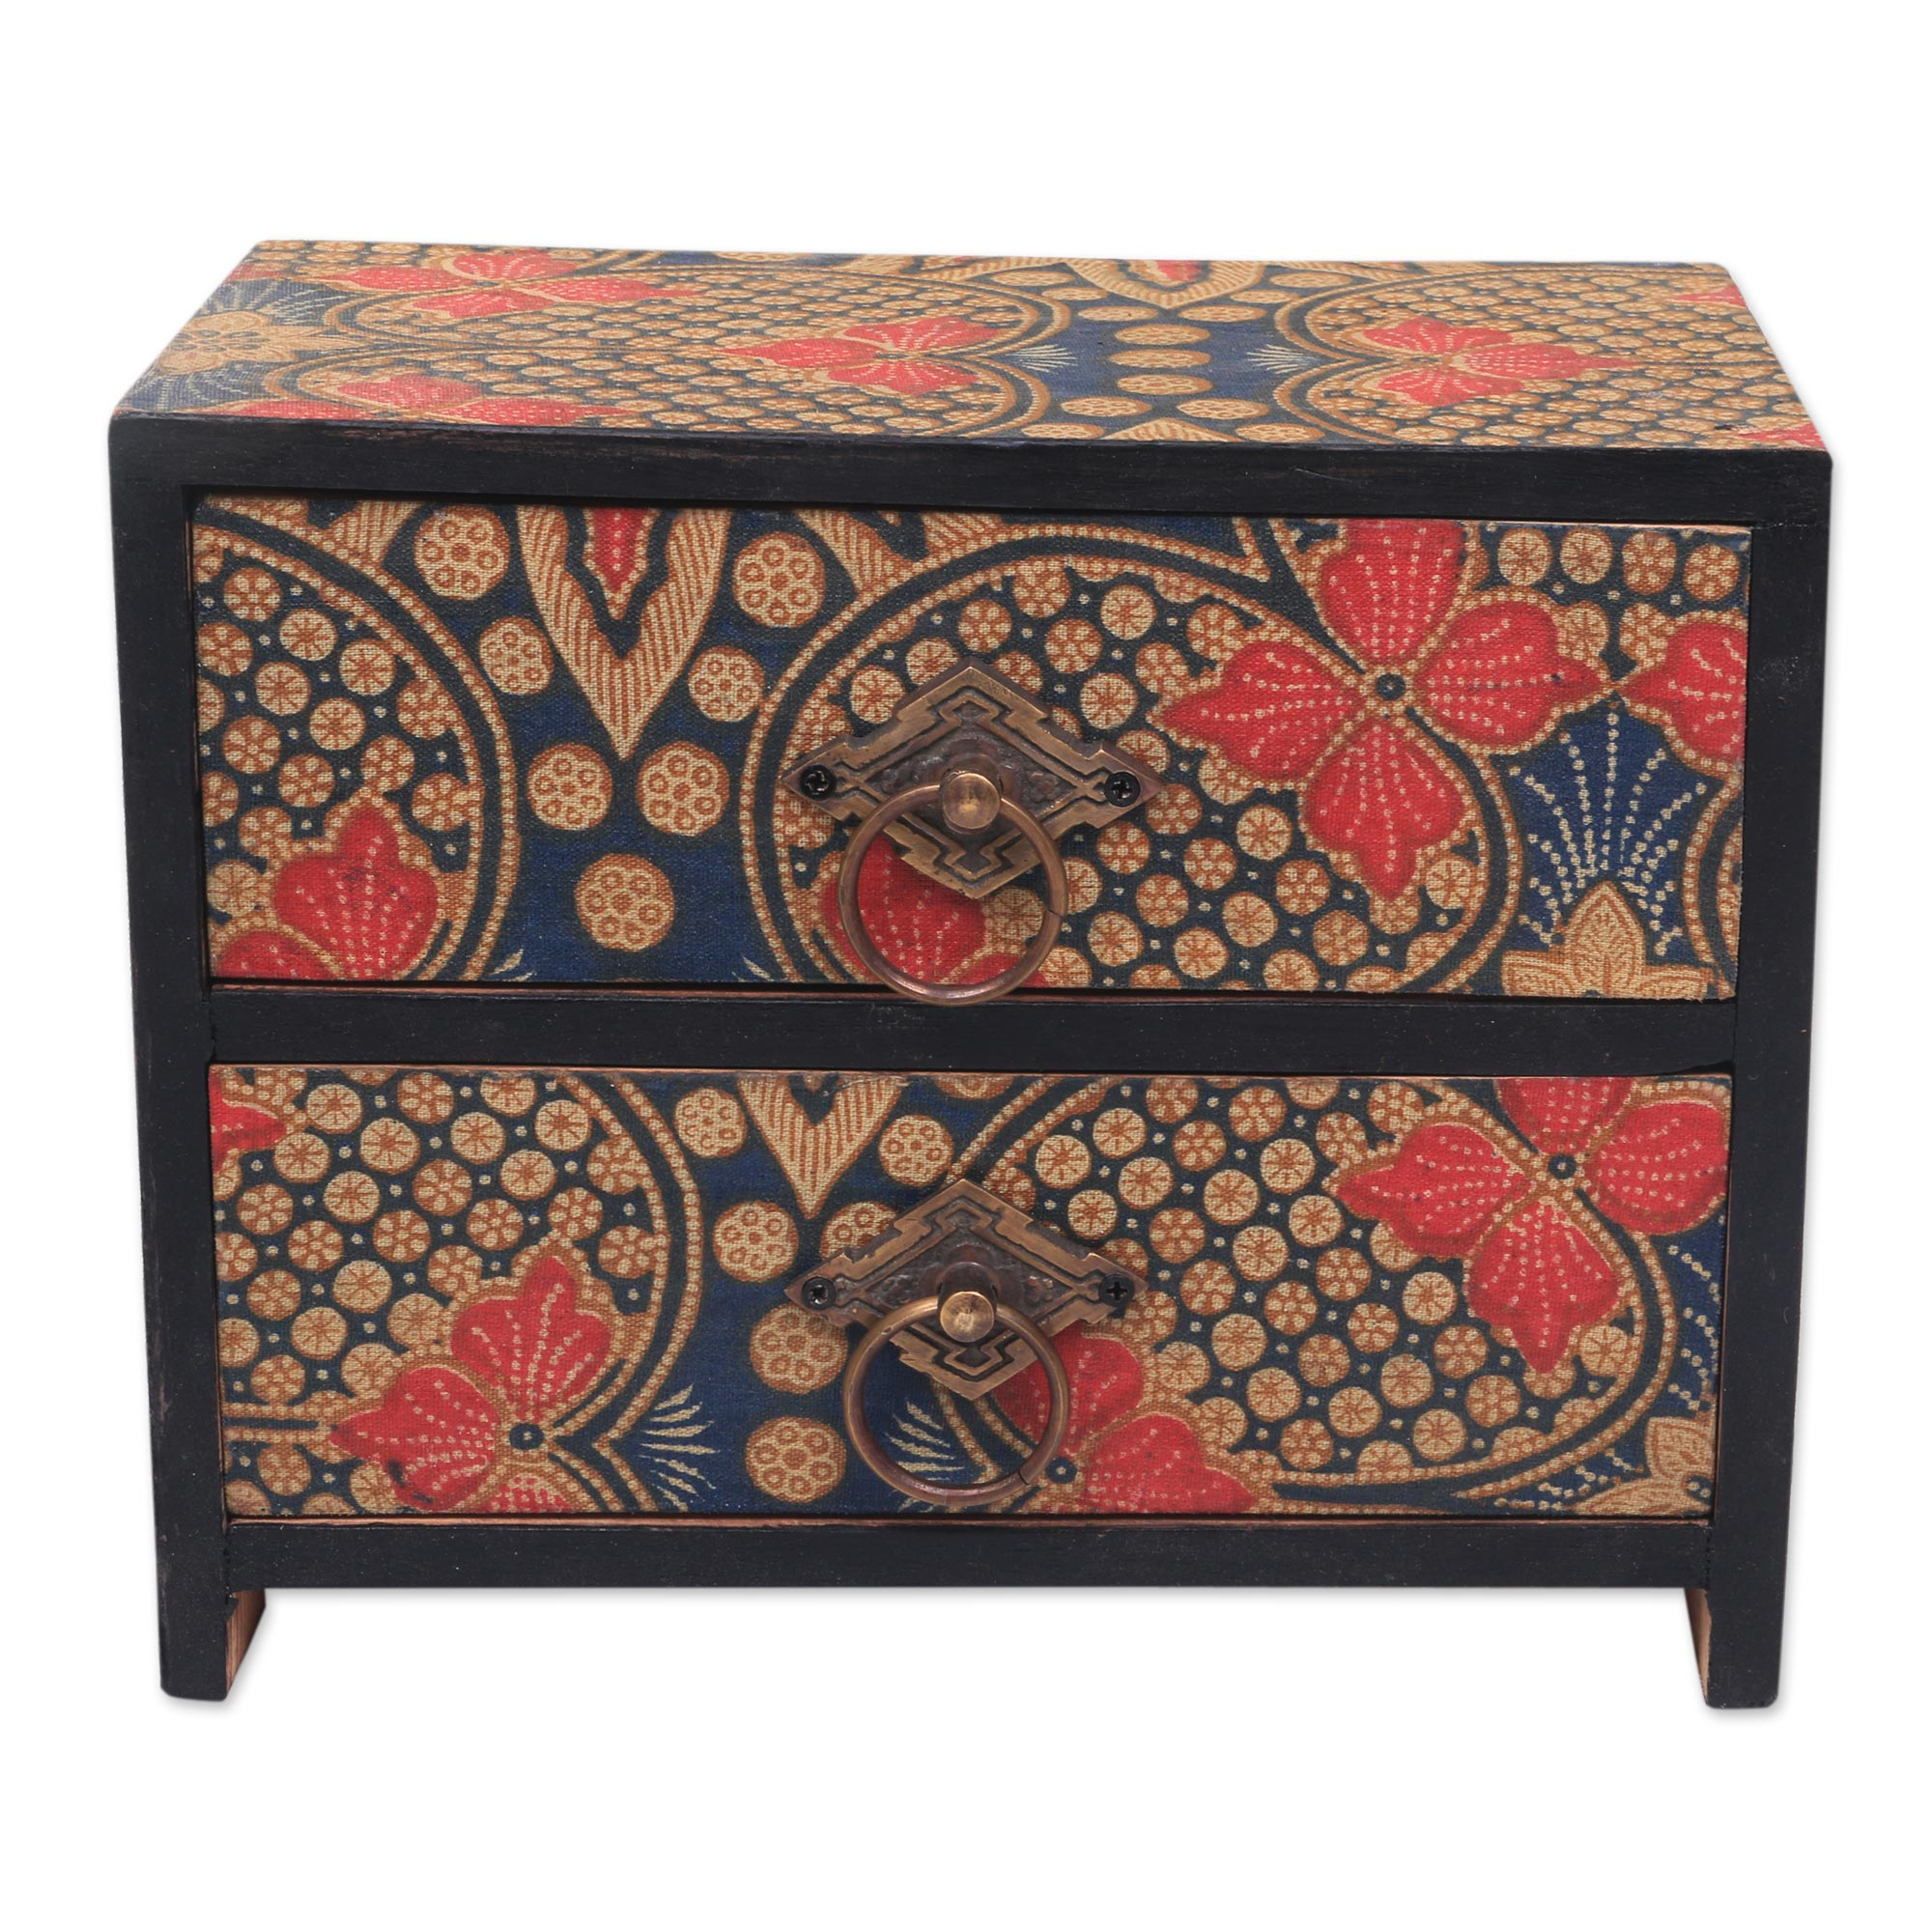 Bali Fabric Covered Wood Mini Chest With 2 Drawers 10 Inch